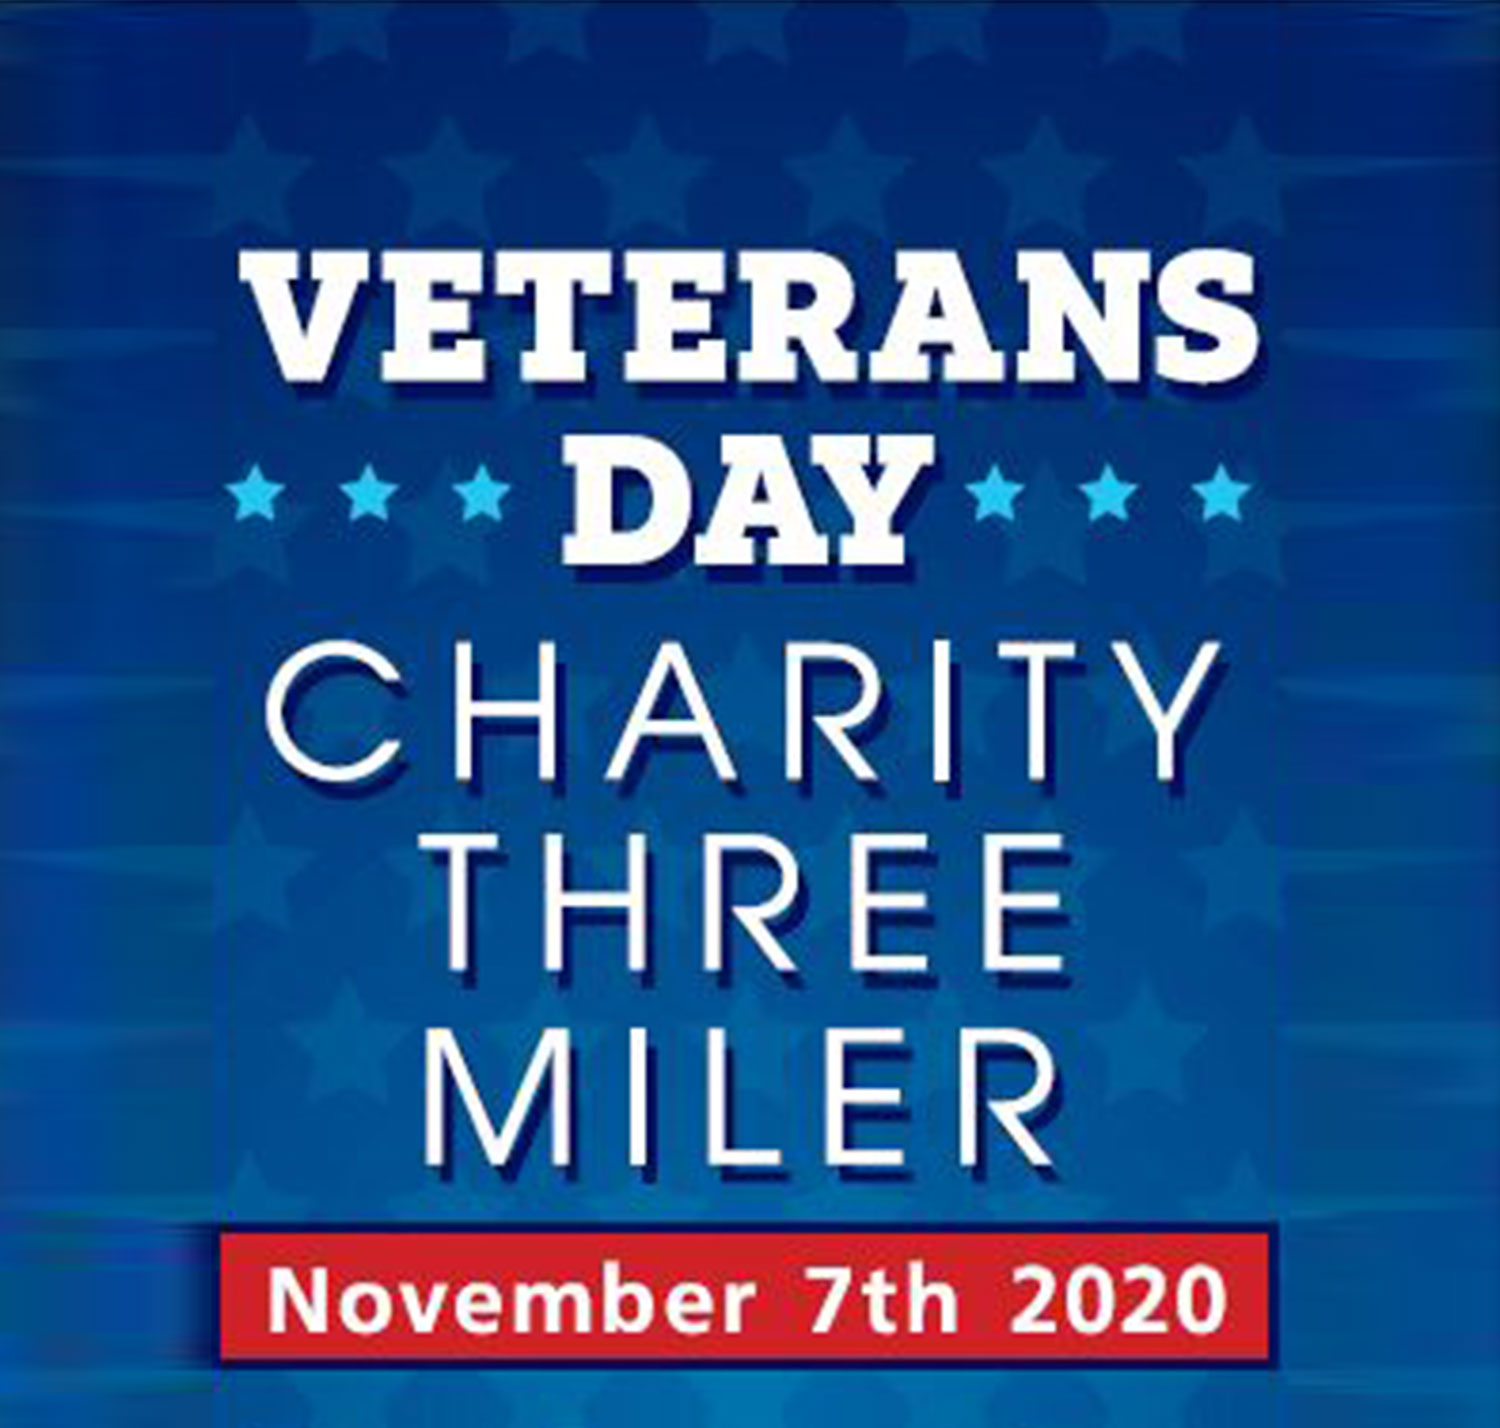 Veterans Day Charity 3 Miler Helping Hands For Freedom